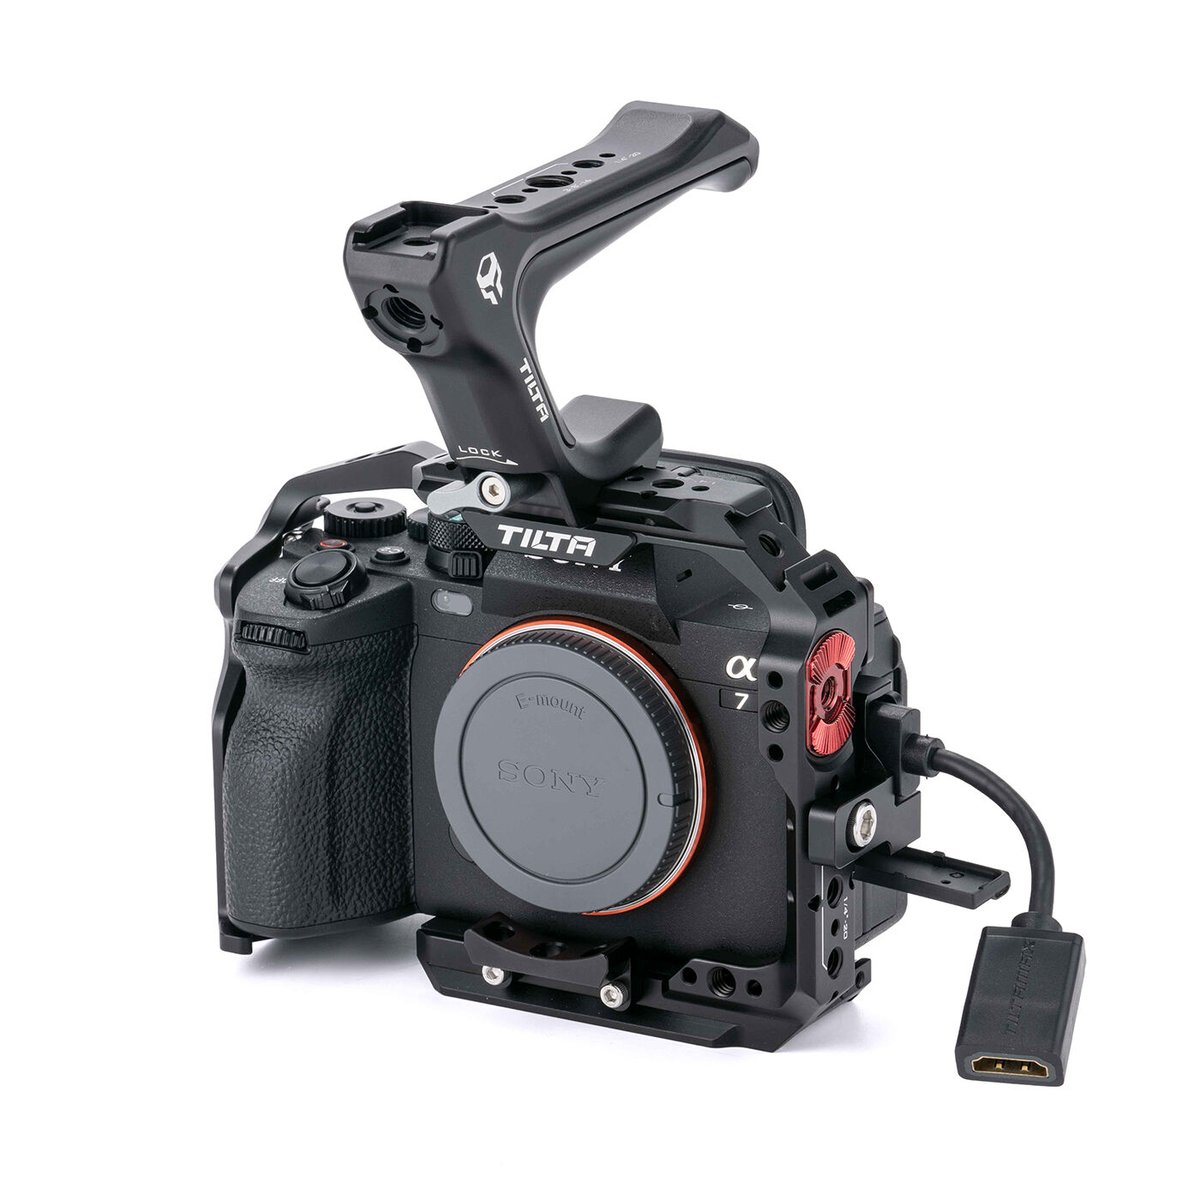 Camera Cage for Sony a7 IV Basic Kit - Black (T...